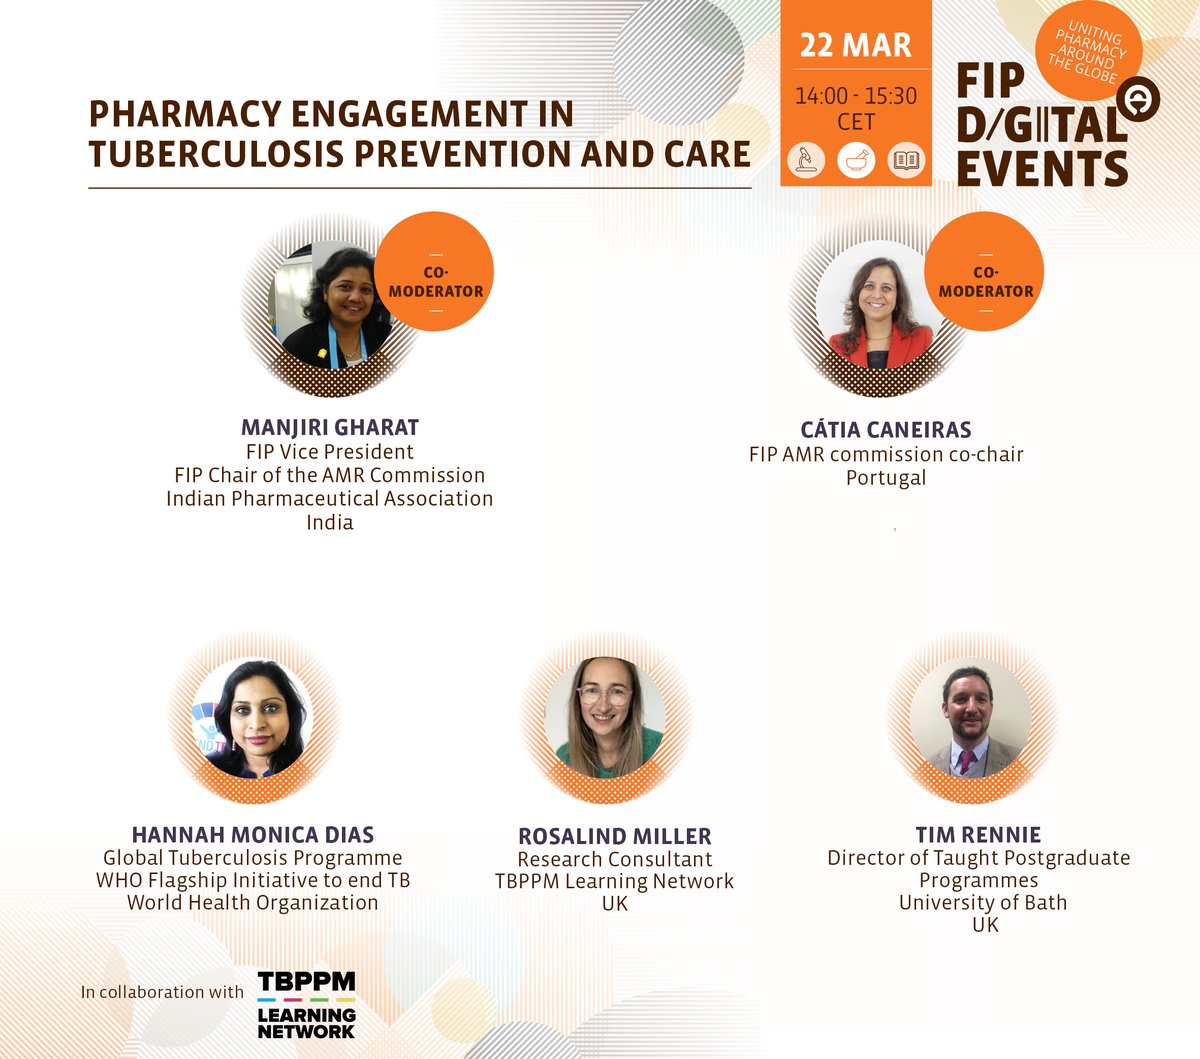 Join our digital event on 22 March at 14:00 CET to mark #WorldTBDay and learn how to strengthen pharmacy engagement, foster collaboration and contribute to a TB-free world:us02web.zoom.us/webinar/regist…